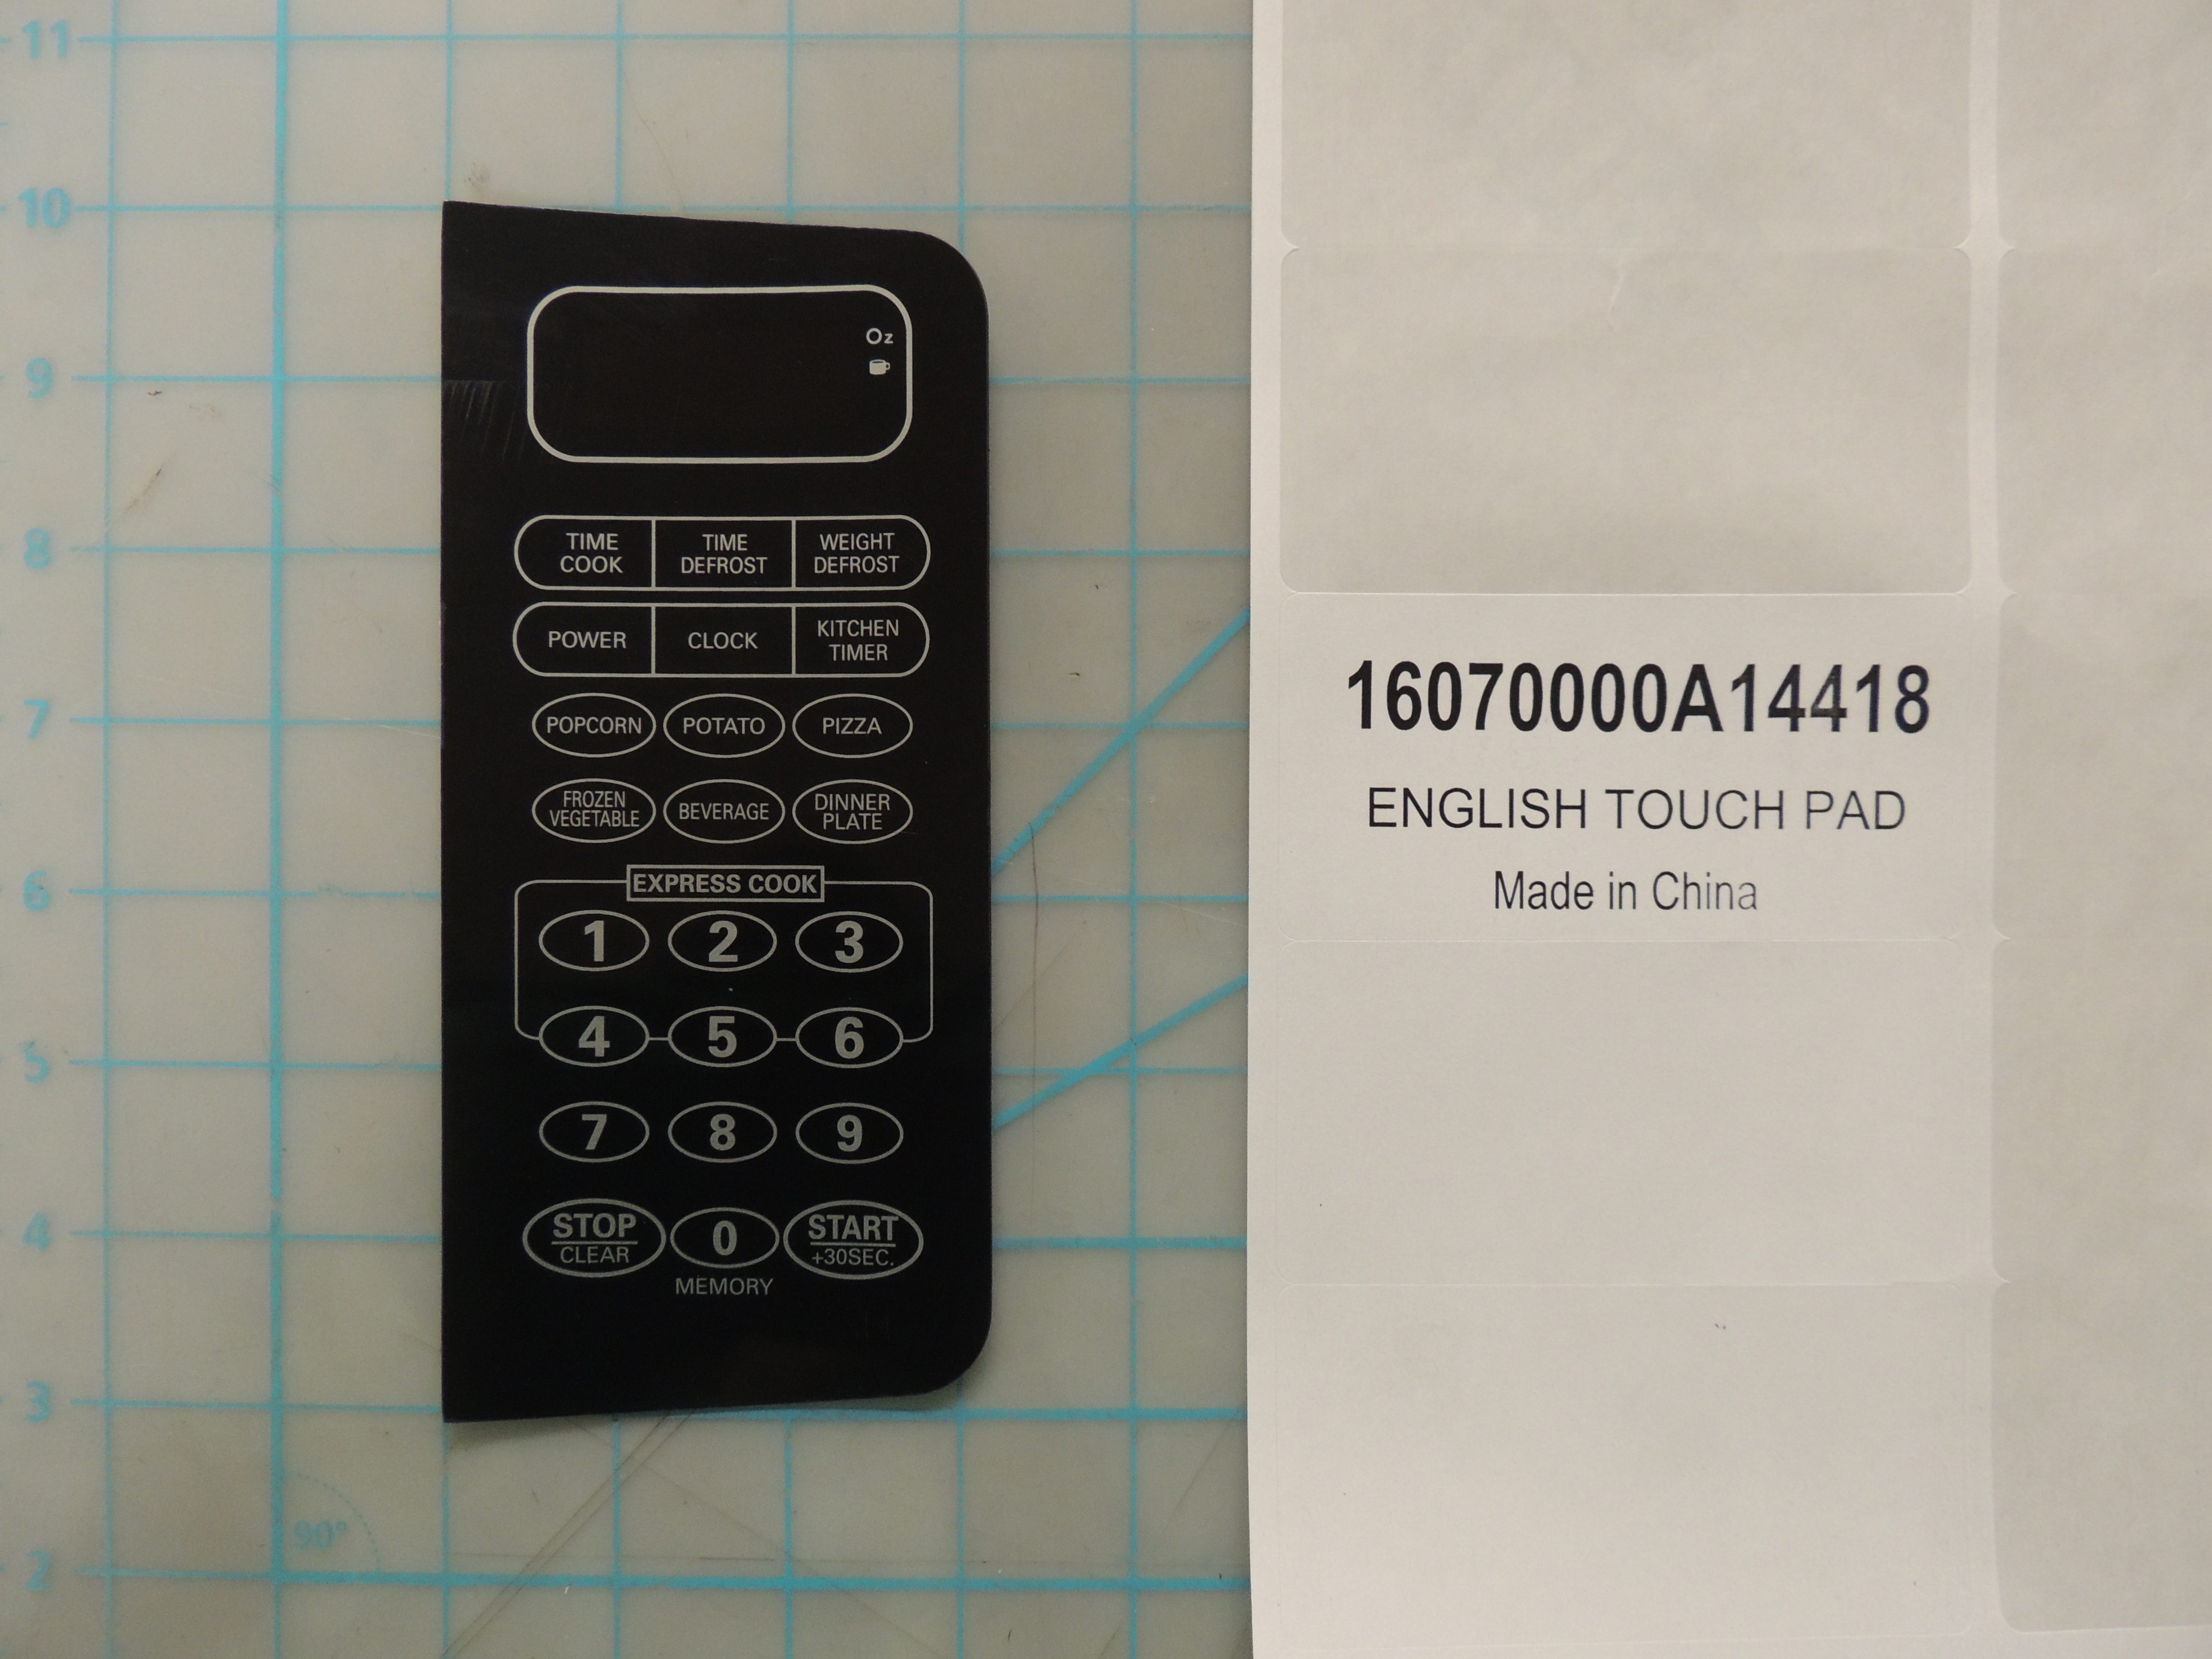 ENGLISH TOUCH PAD